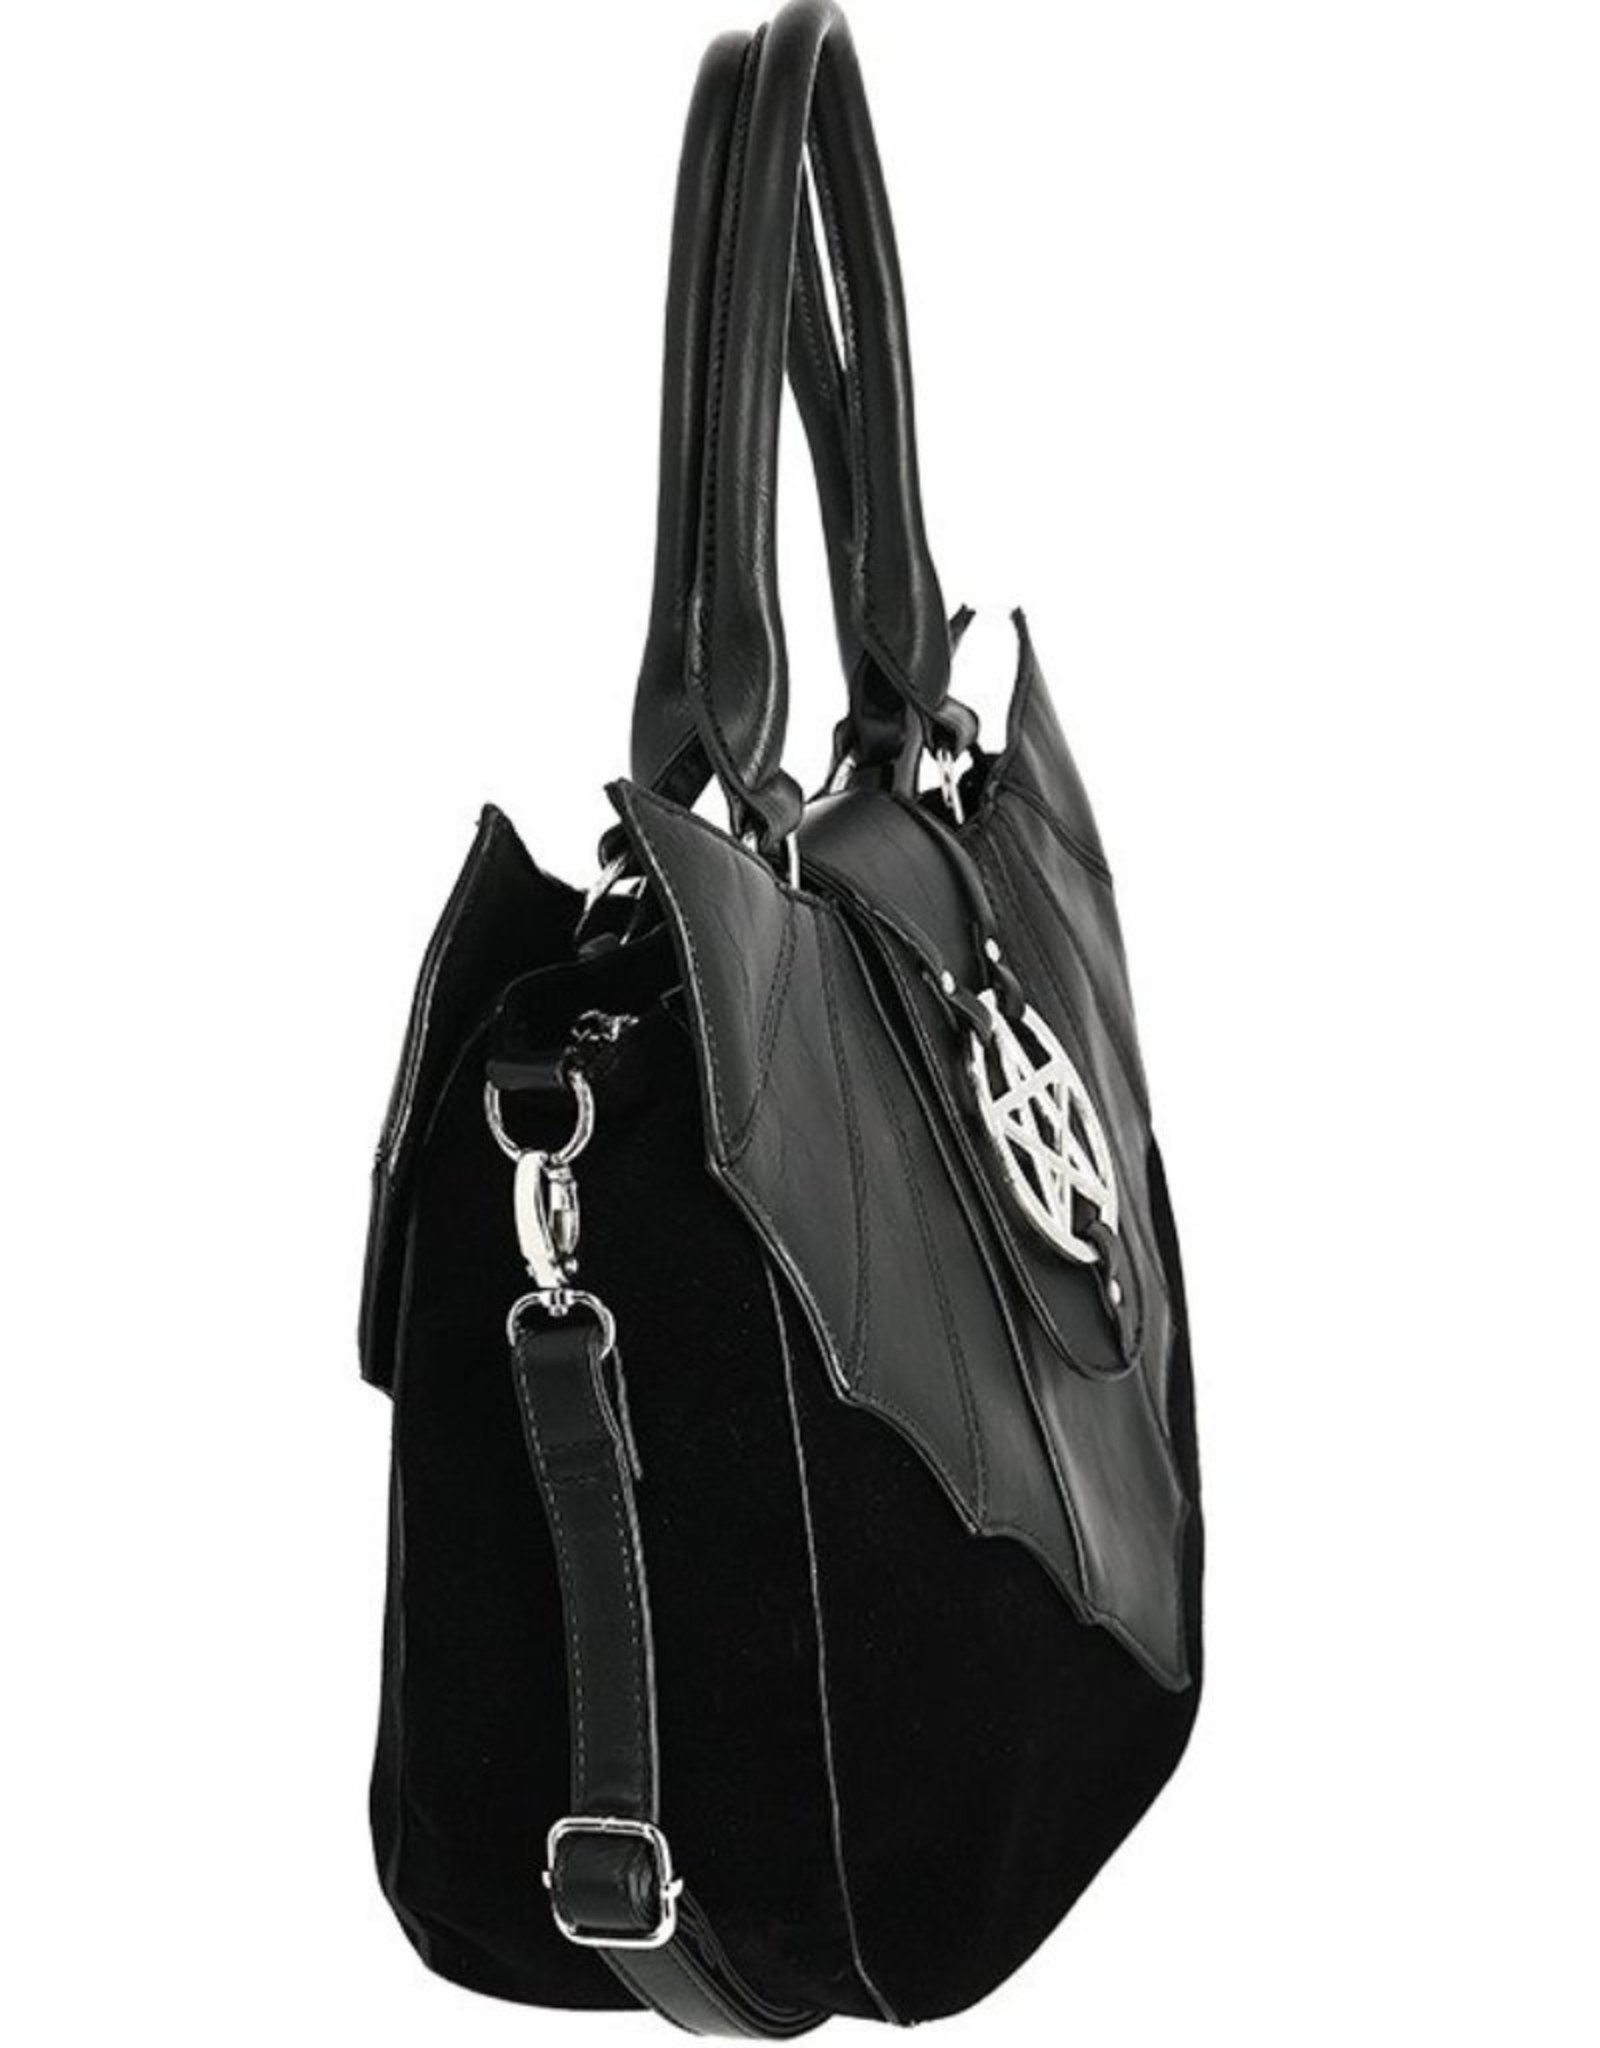 Restyle Gothic bags Steampunk bags - Gothic handbag with Pentagram and Bat wings